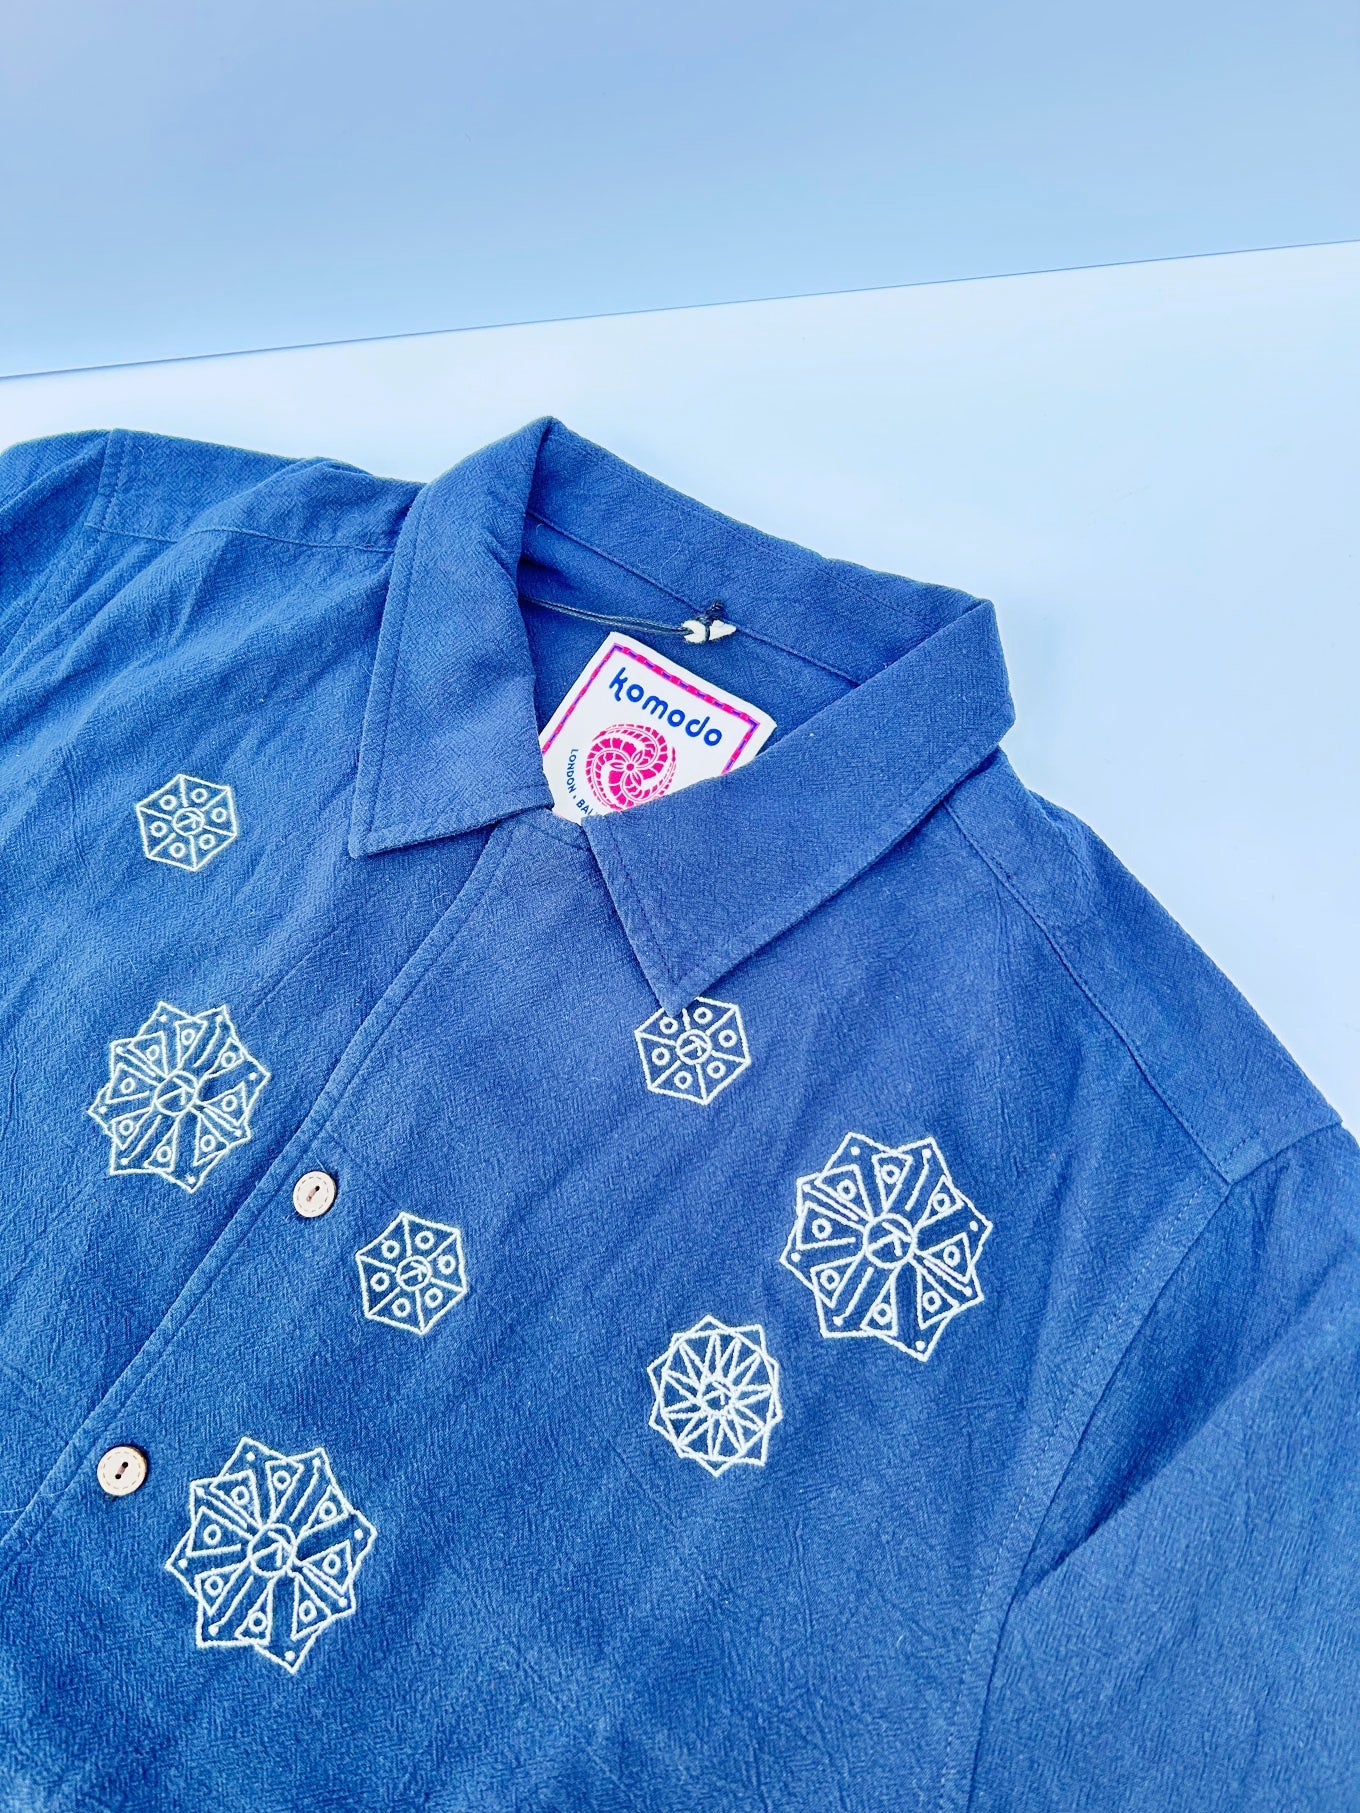 SPINDRIFT - Organic Cotton Shirt Embroidery Navy